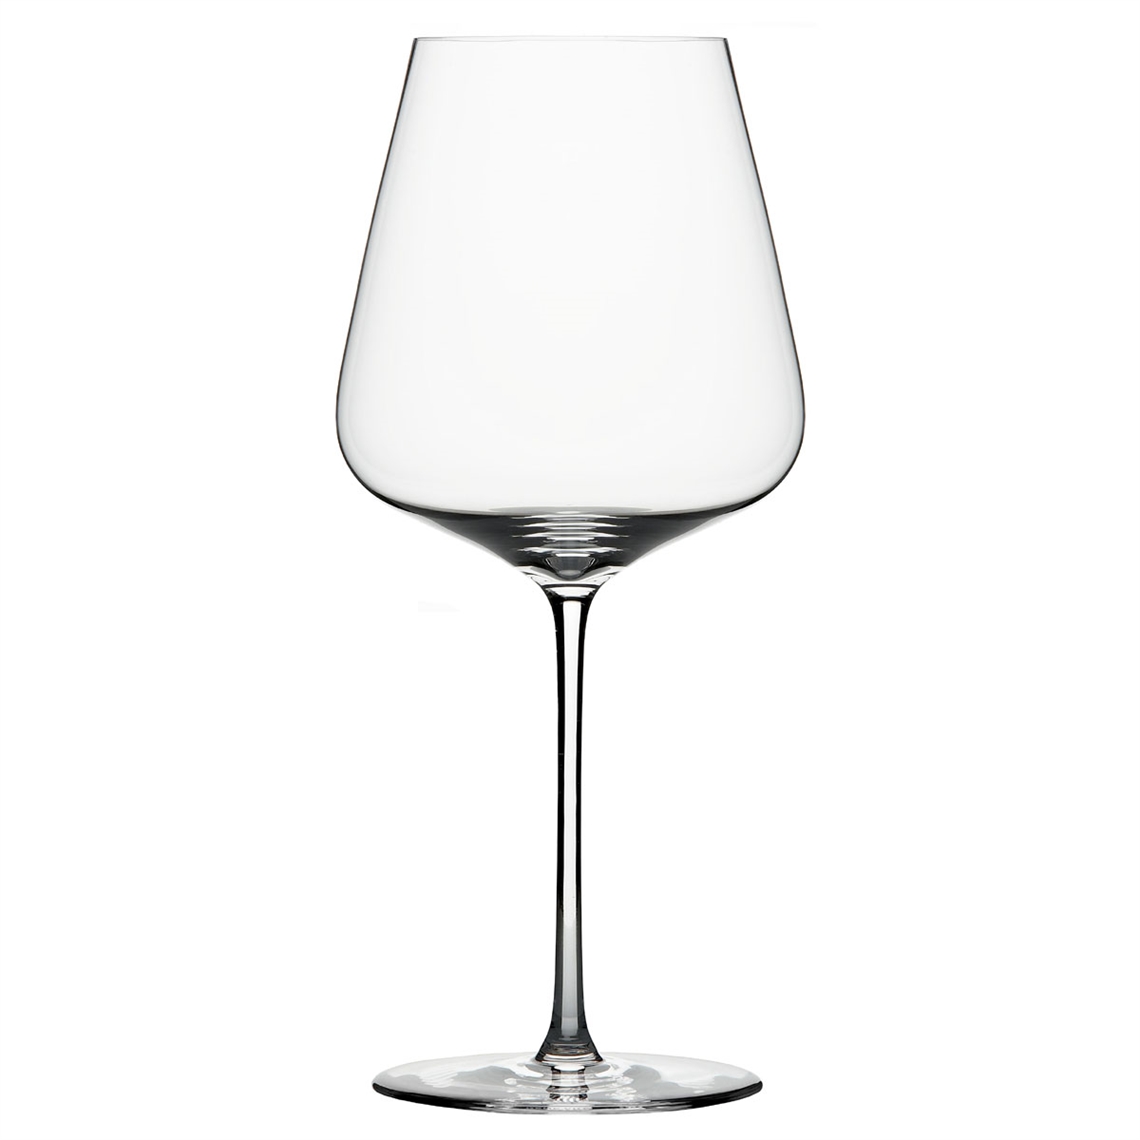 View more what makes iso wine tasting glasses so popular? from our Premium Mouth Blown Glassware range